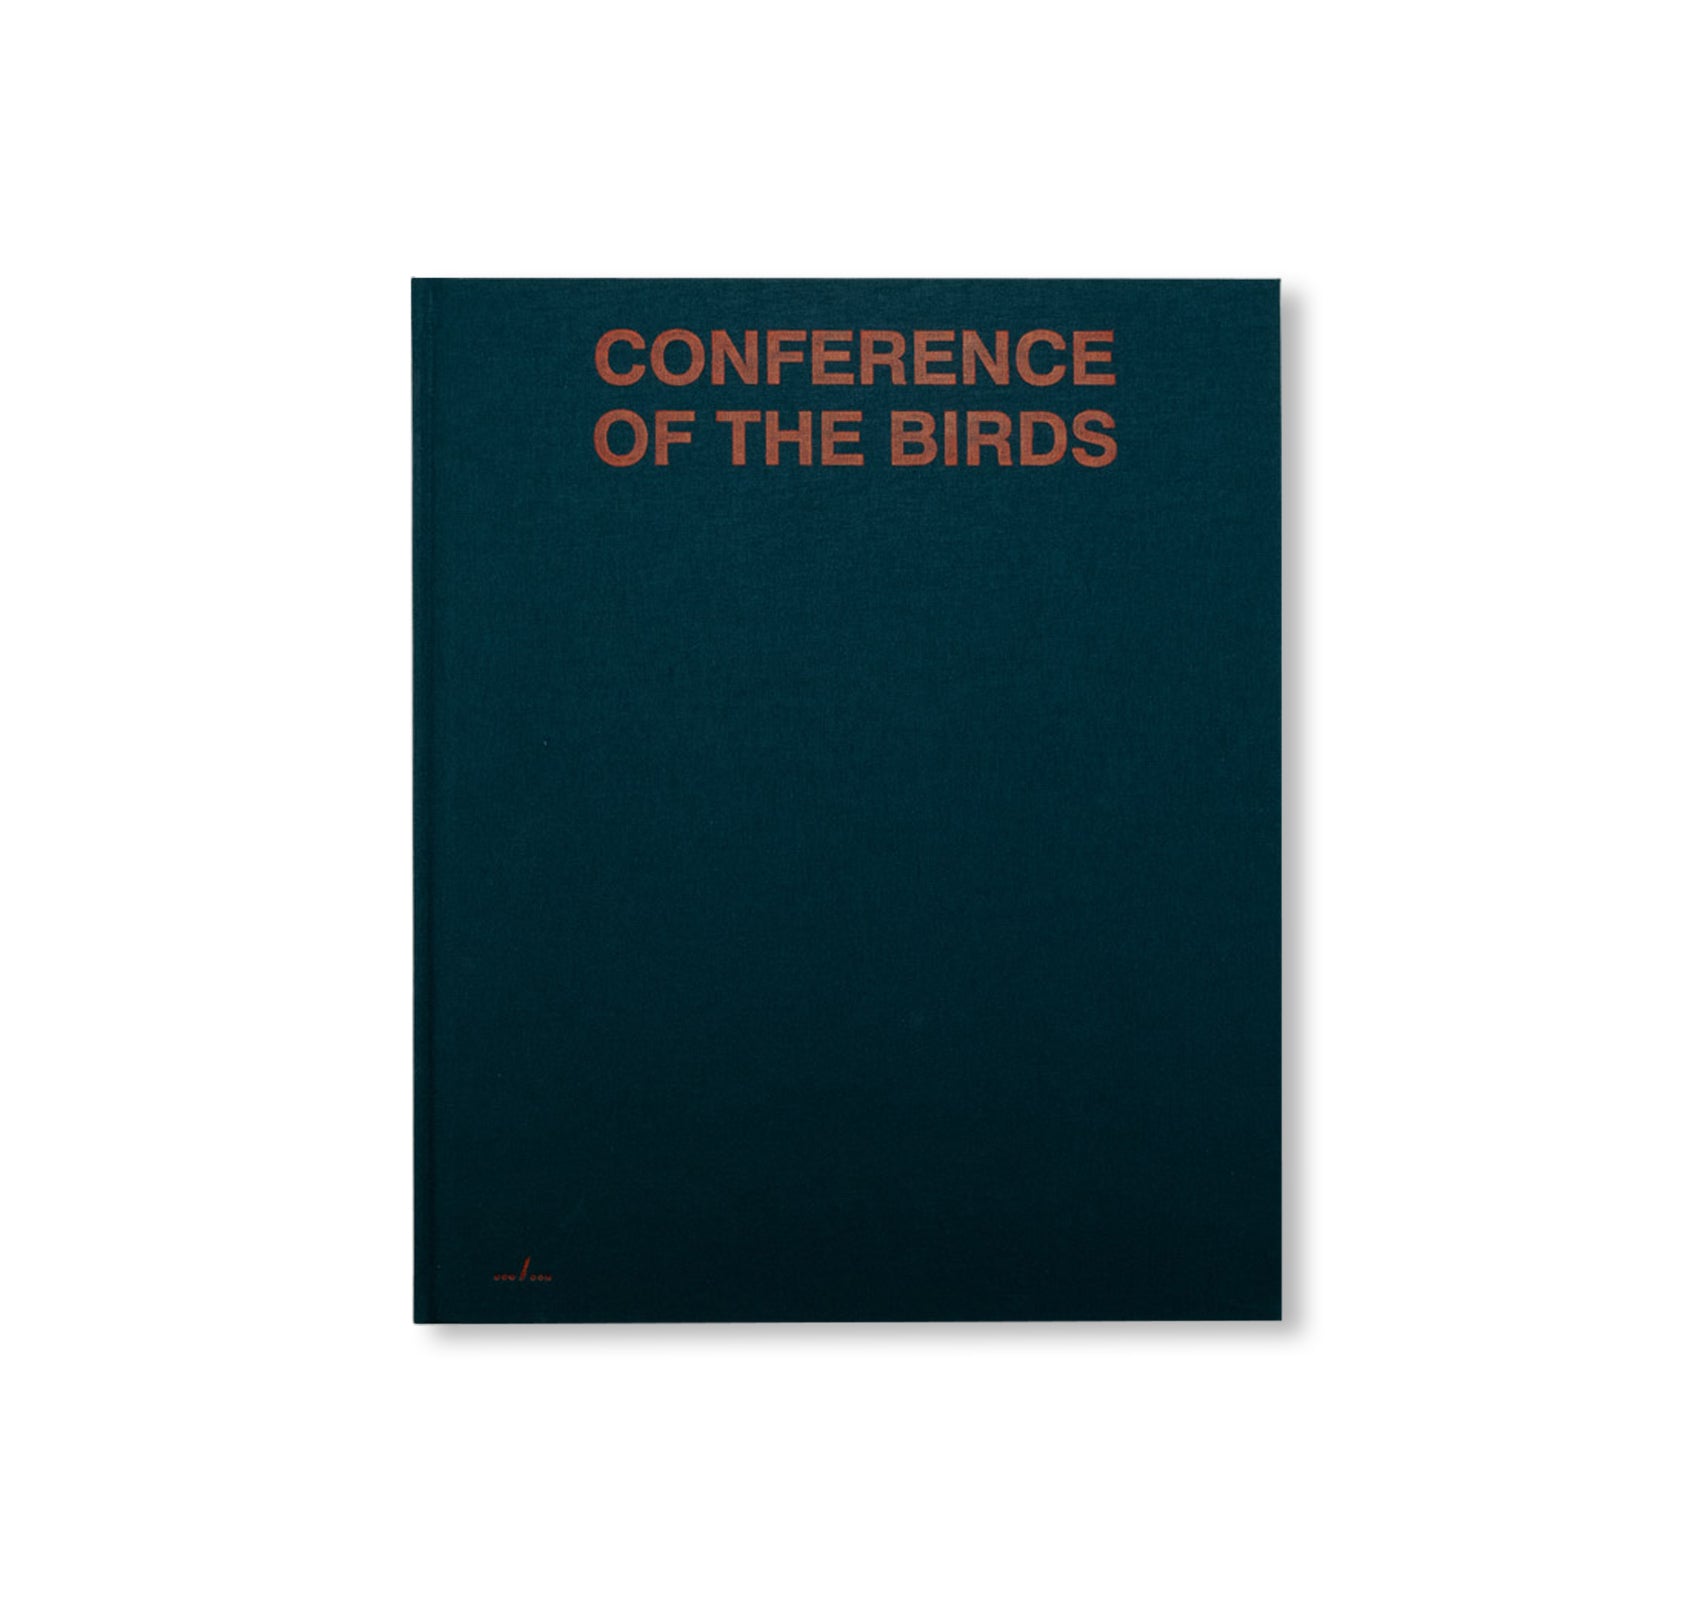 CONFERENCE OF THE BIRDS by Sybren Vanoverberghe